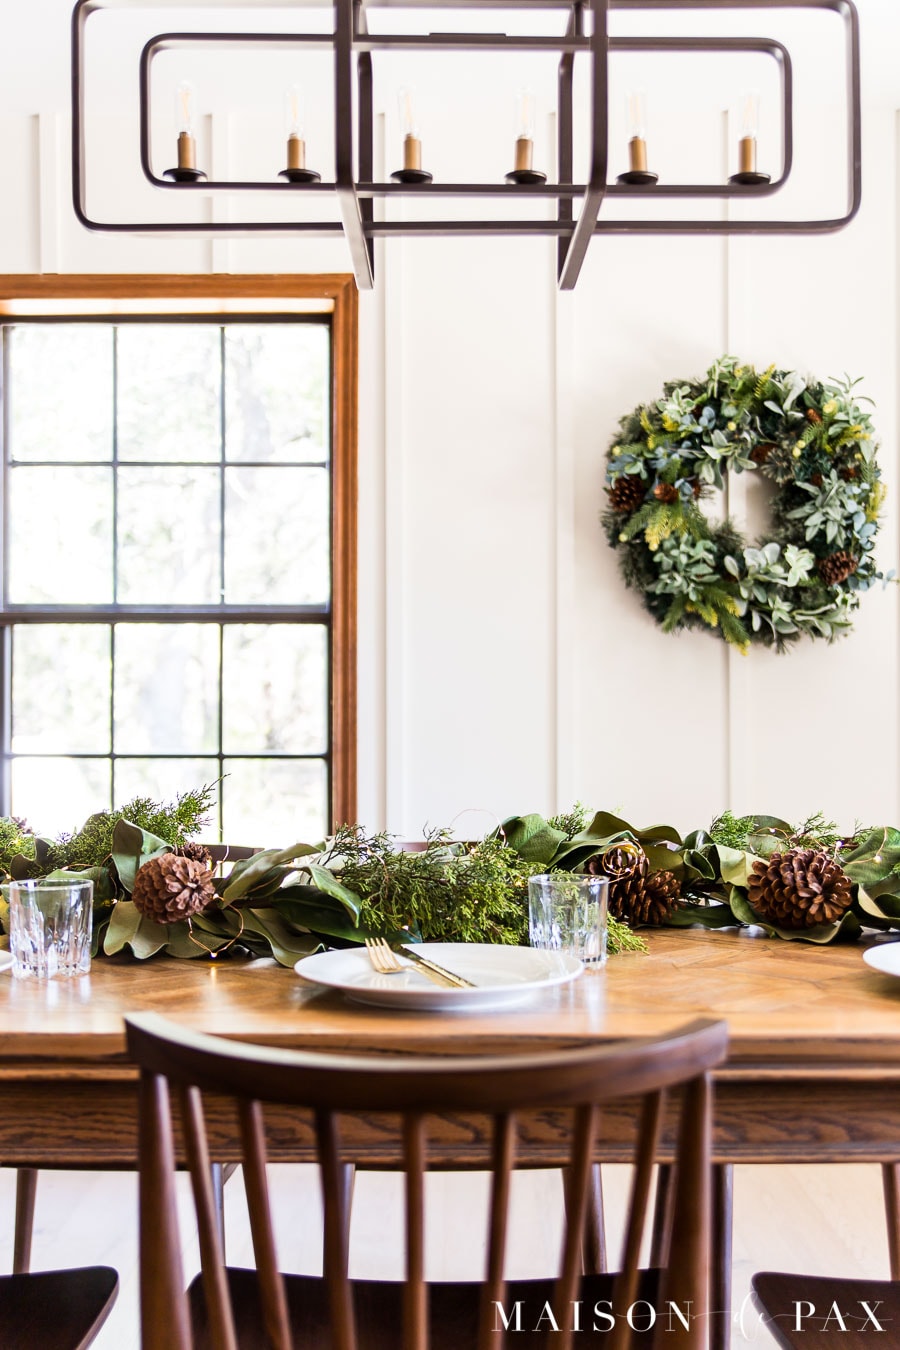 wood table with greenery centerpiece and wreath on white walls | Maison de Pax